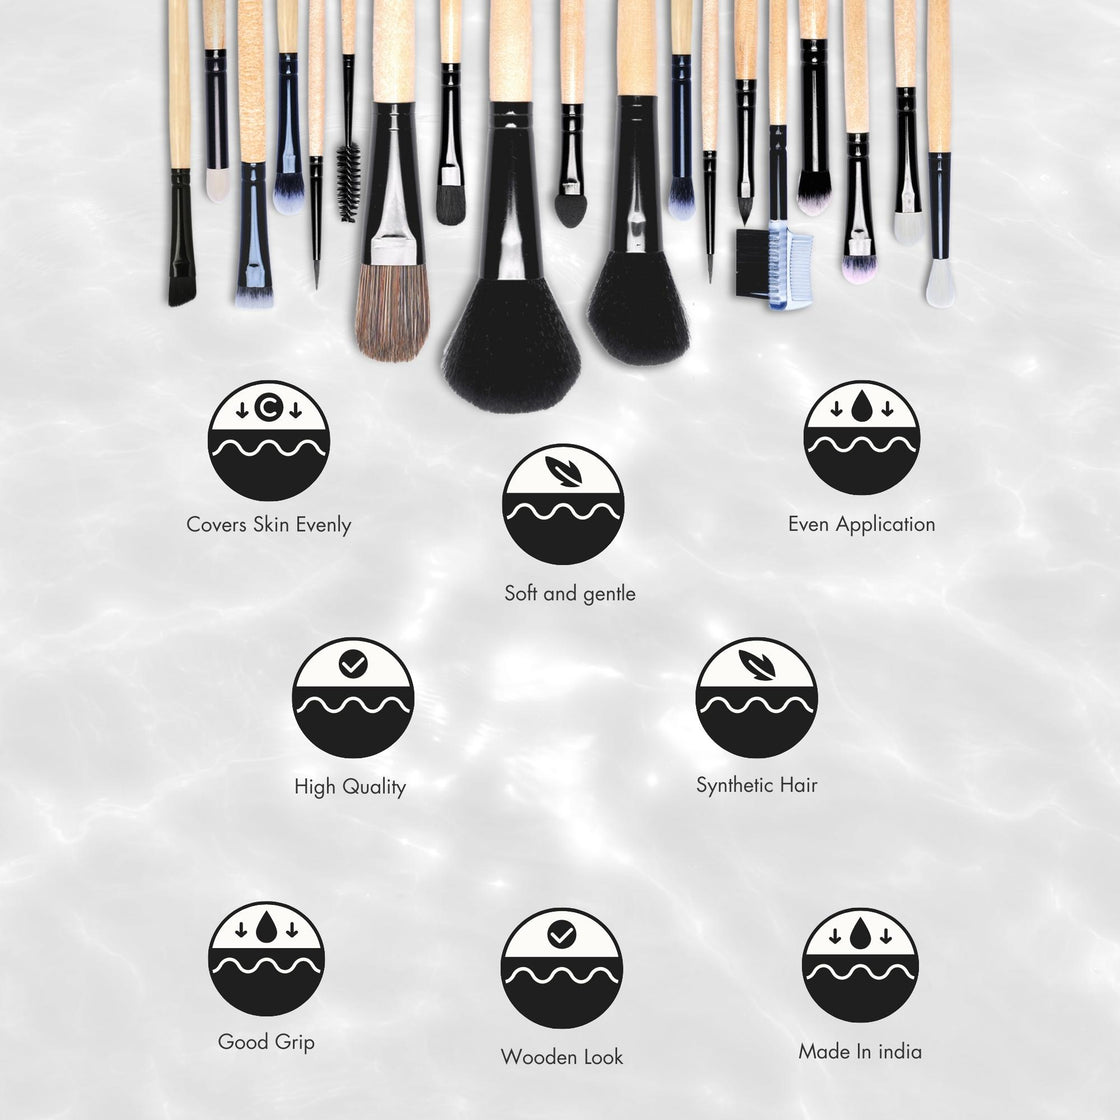 Allure Classic Makeup Brushes  Pack Of 19 ( ACK-19 )